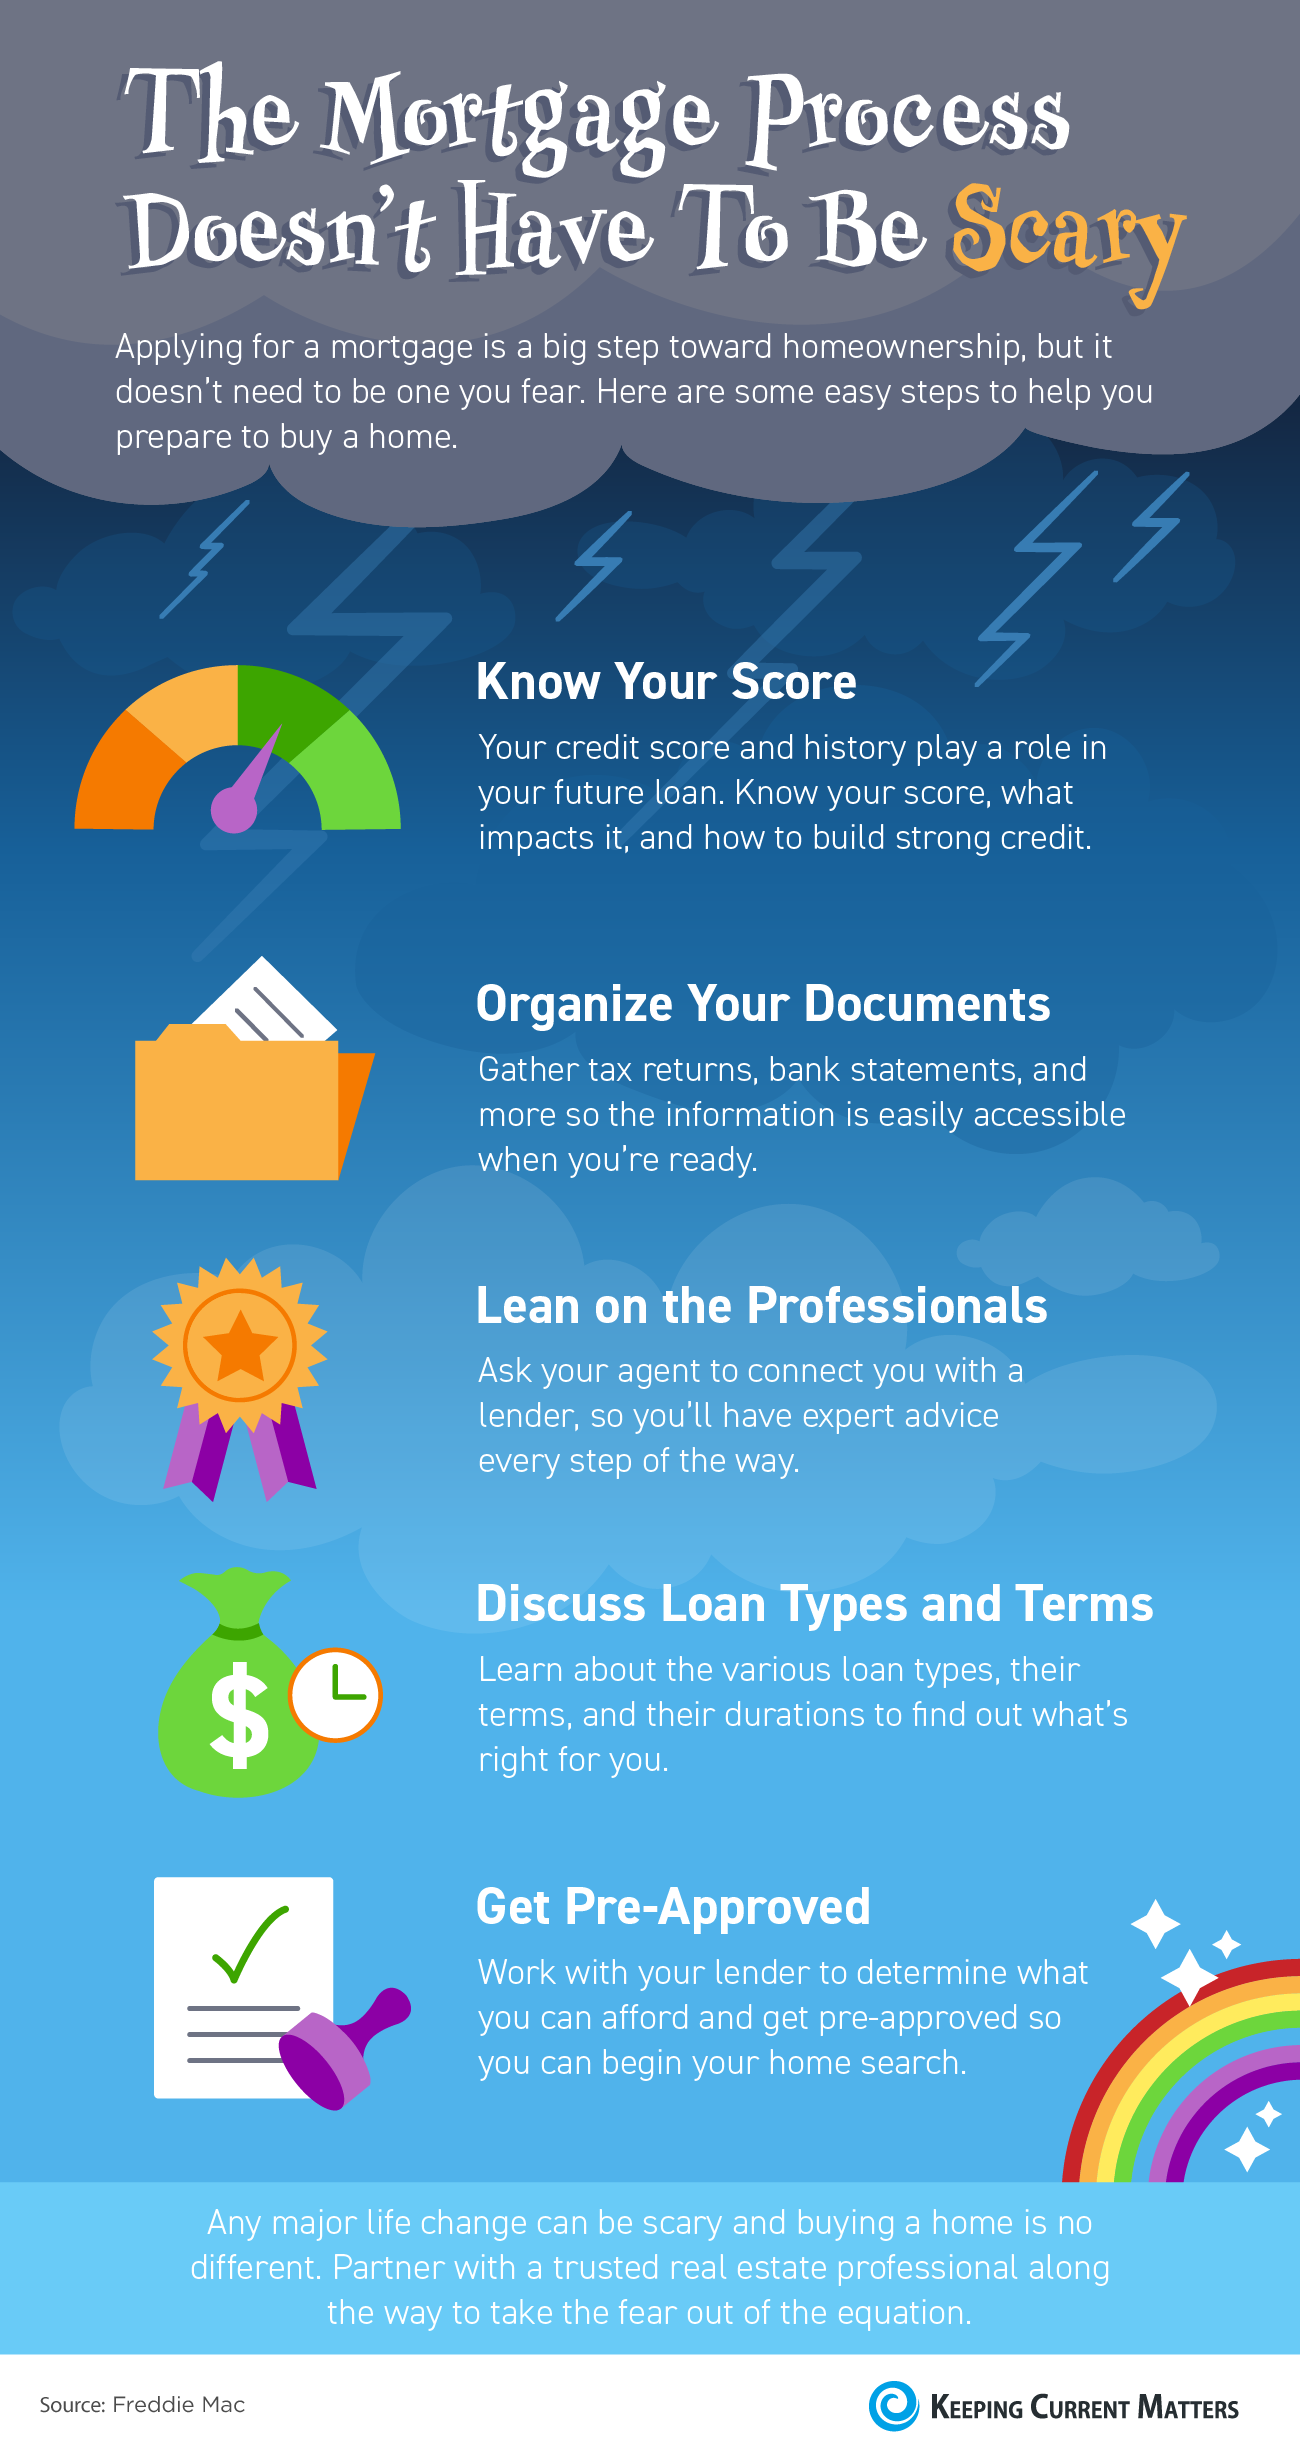 The Mortgage Process Doesn’t Have To Be Scary [INFOGRAPHIC] | Keeping Current Matters